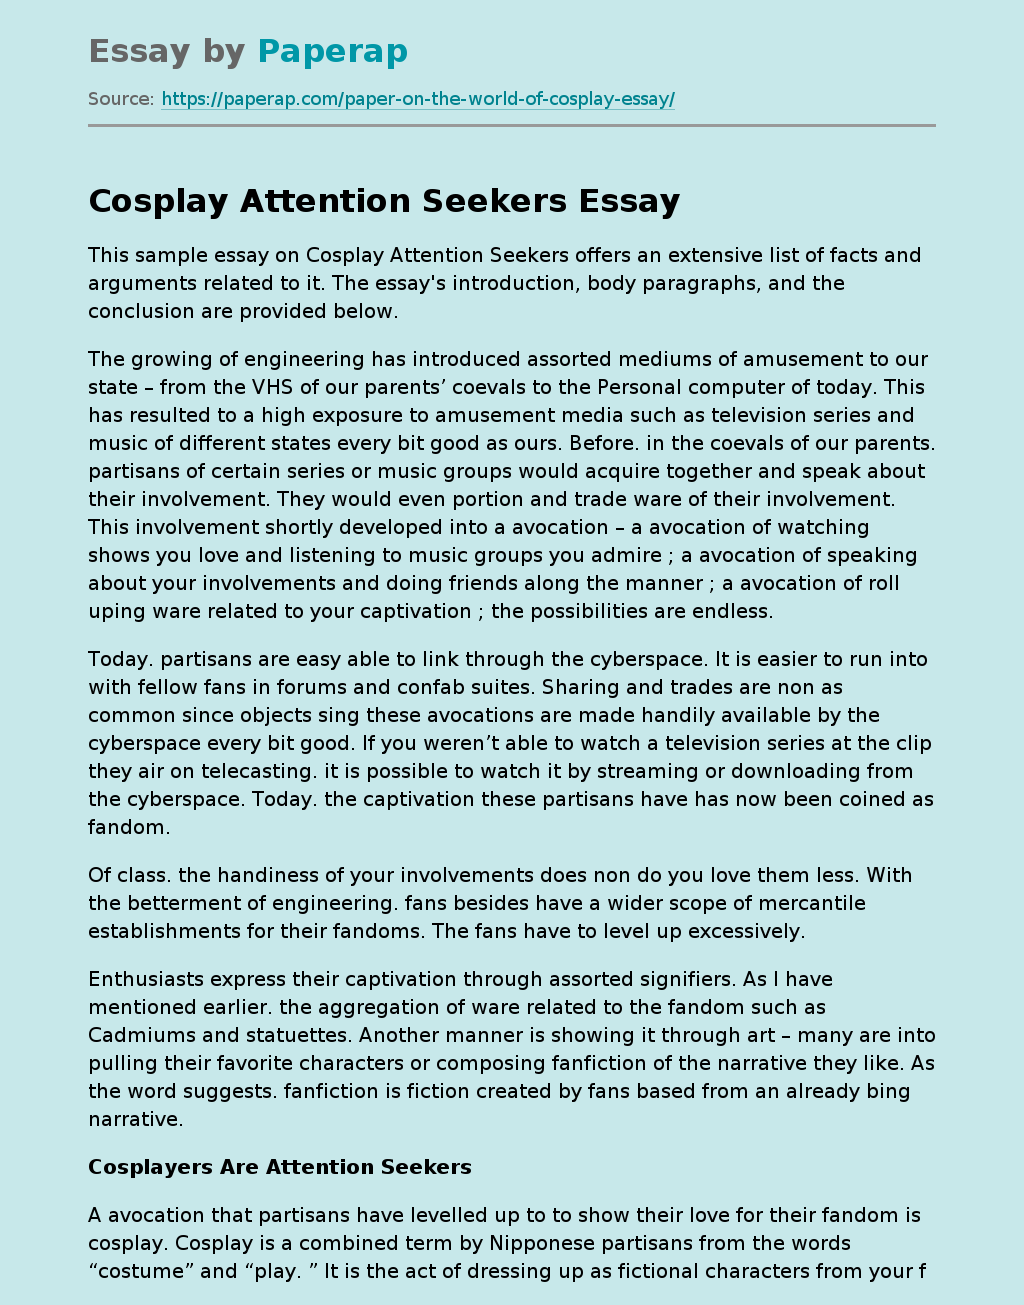 Cosplay Attention Seekers